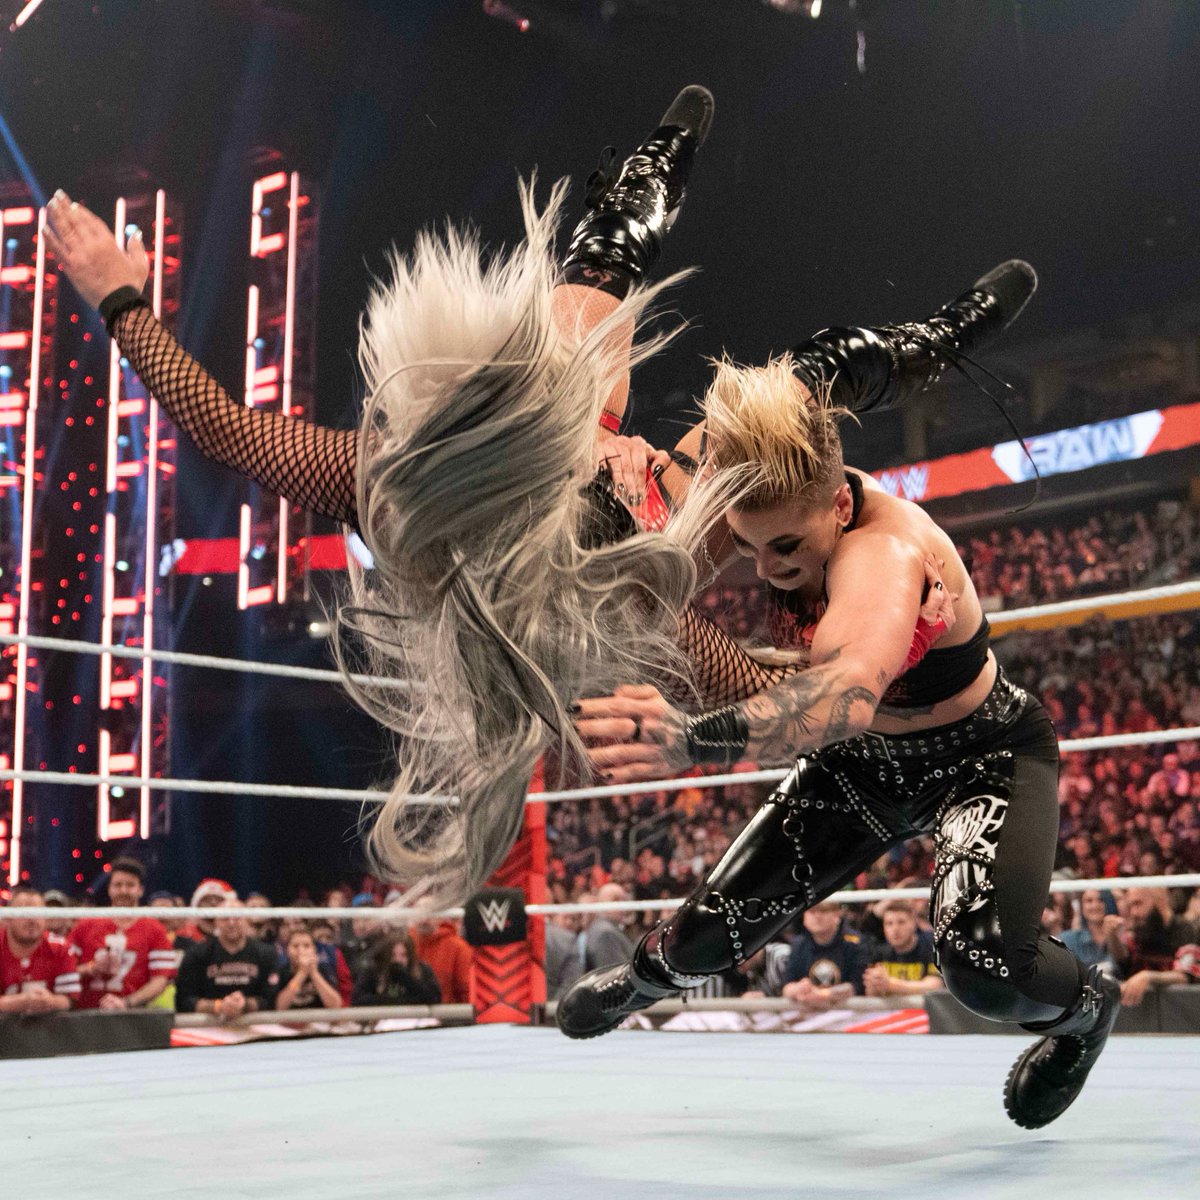 2 years ago, we saw the end of 'Liv 4 Brutality' when @RheaRipley_WWE viciously attacked @YaOnlyLivvOnce! #WWERaw